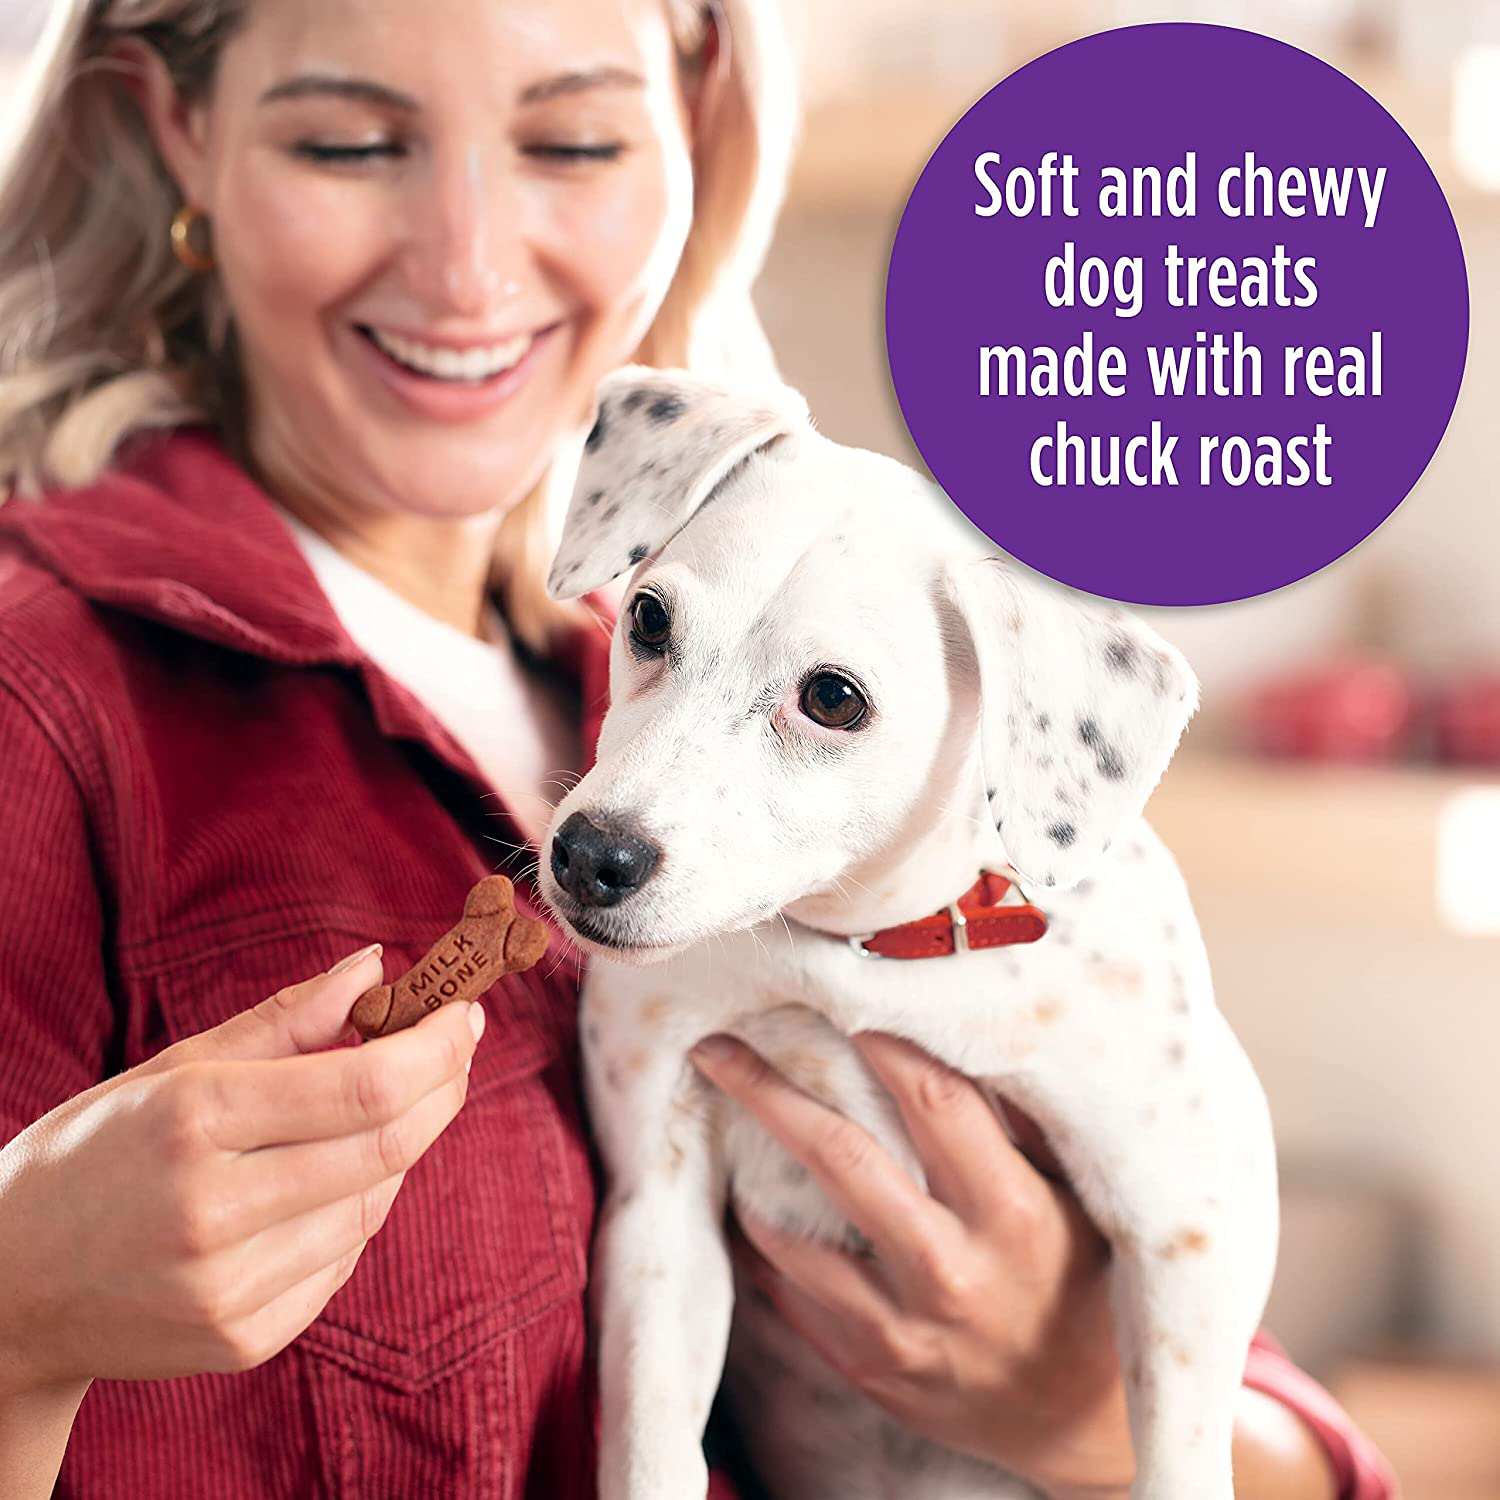 Milk-Bone Soft & Chewy Dog Treats with 12 Vitamins and Minerals Animals & Pet Supplies > Pet Supplies > Dog Supplies > Dog Treats Milk-Bone   